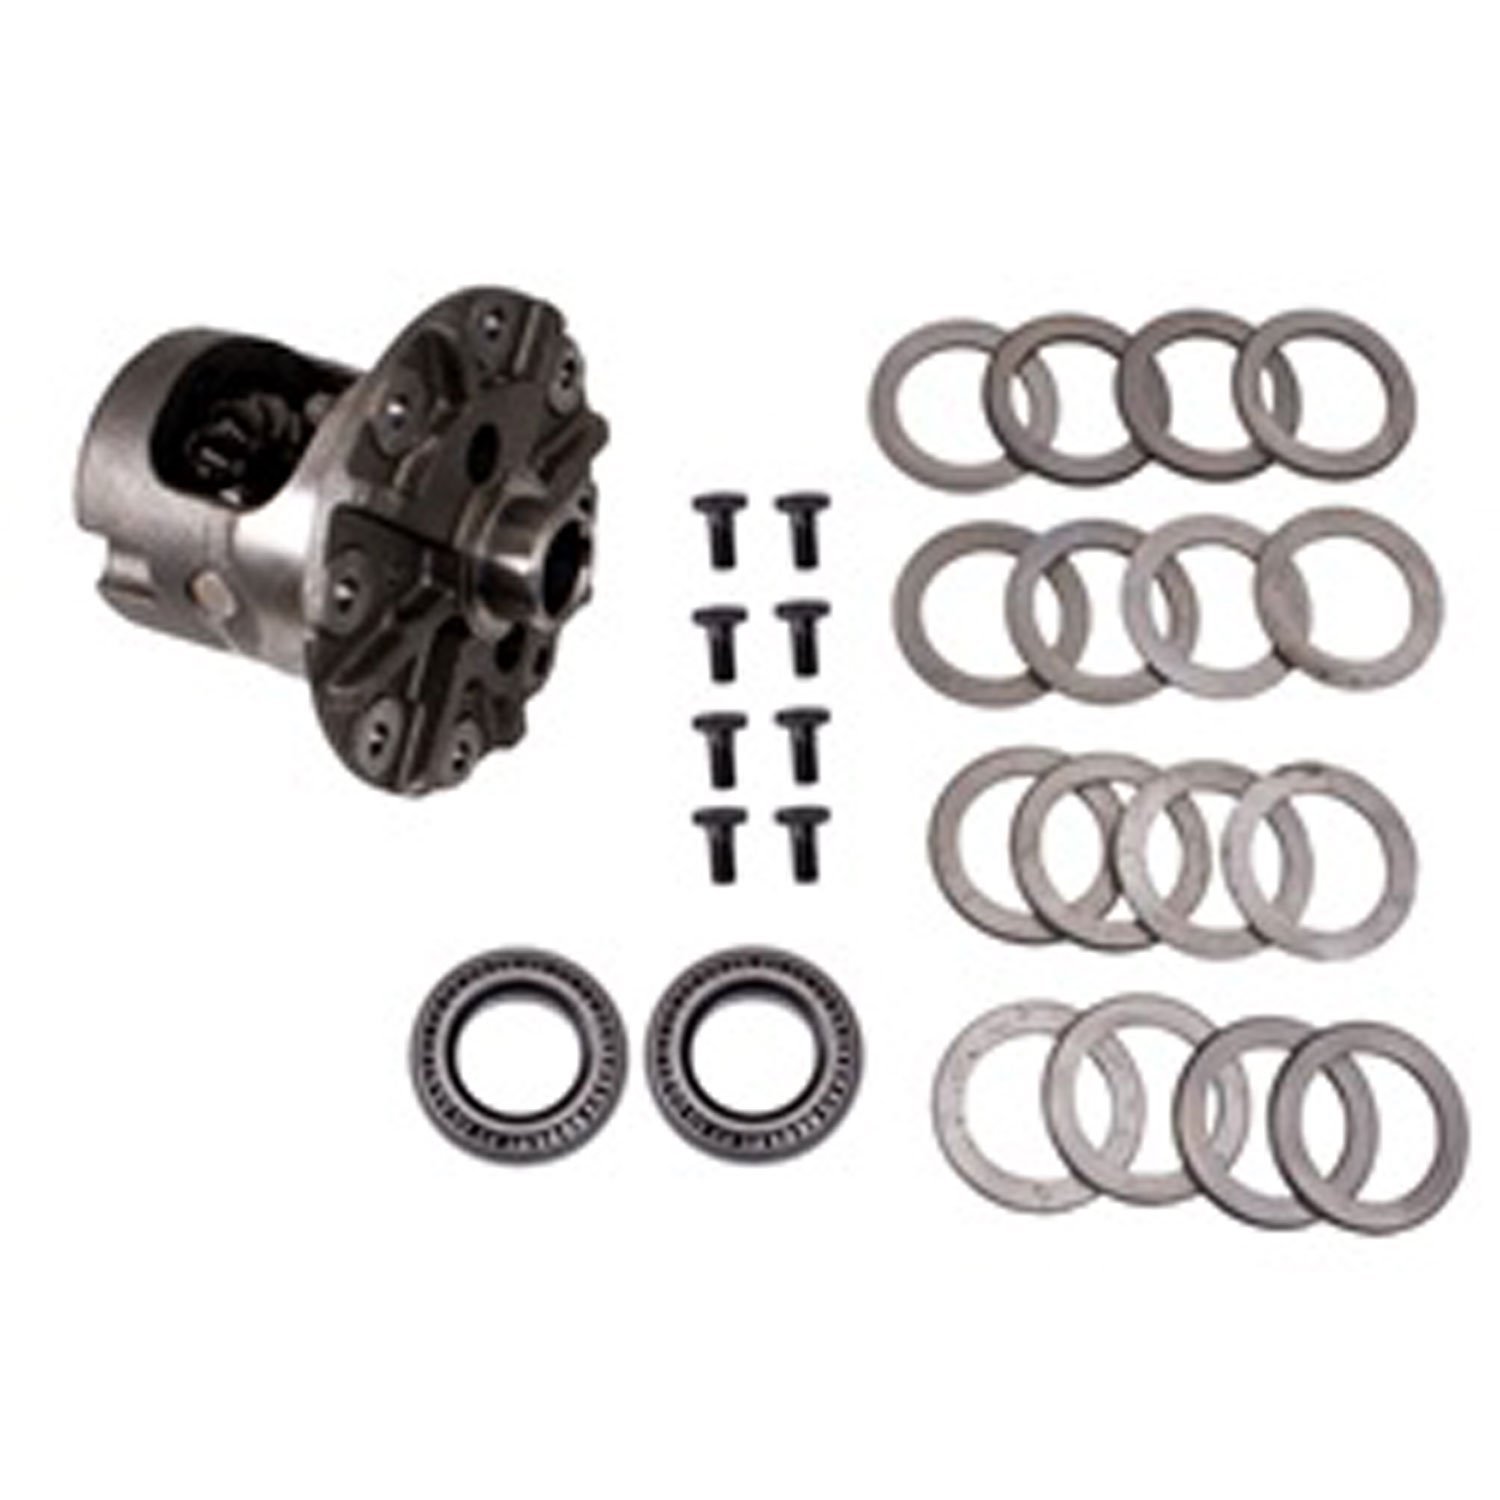 This differential carrier assembly from Omix-ADA fits Jeep